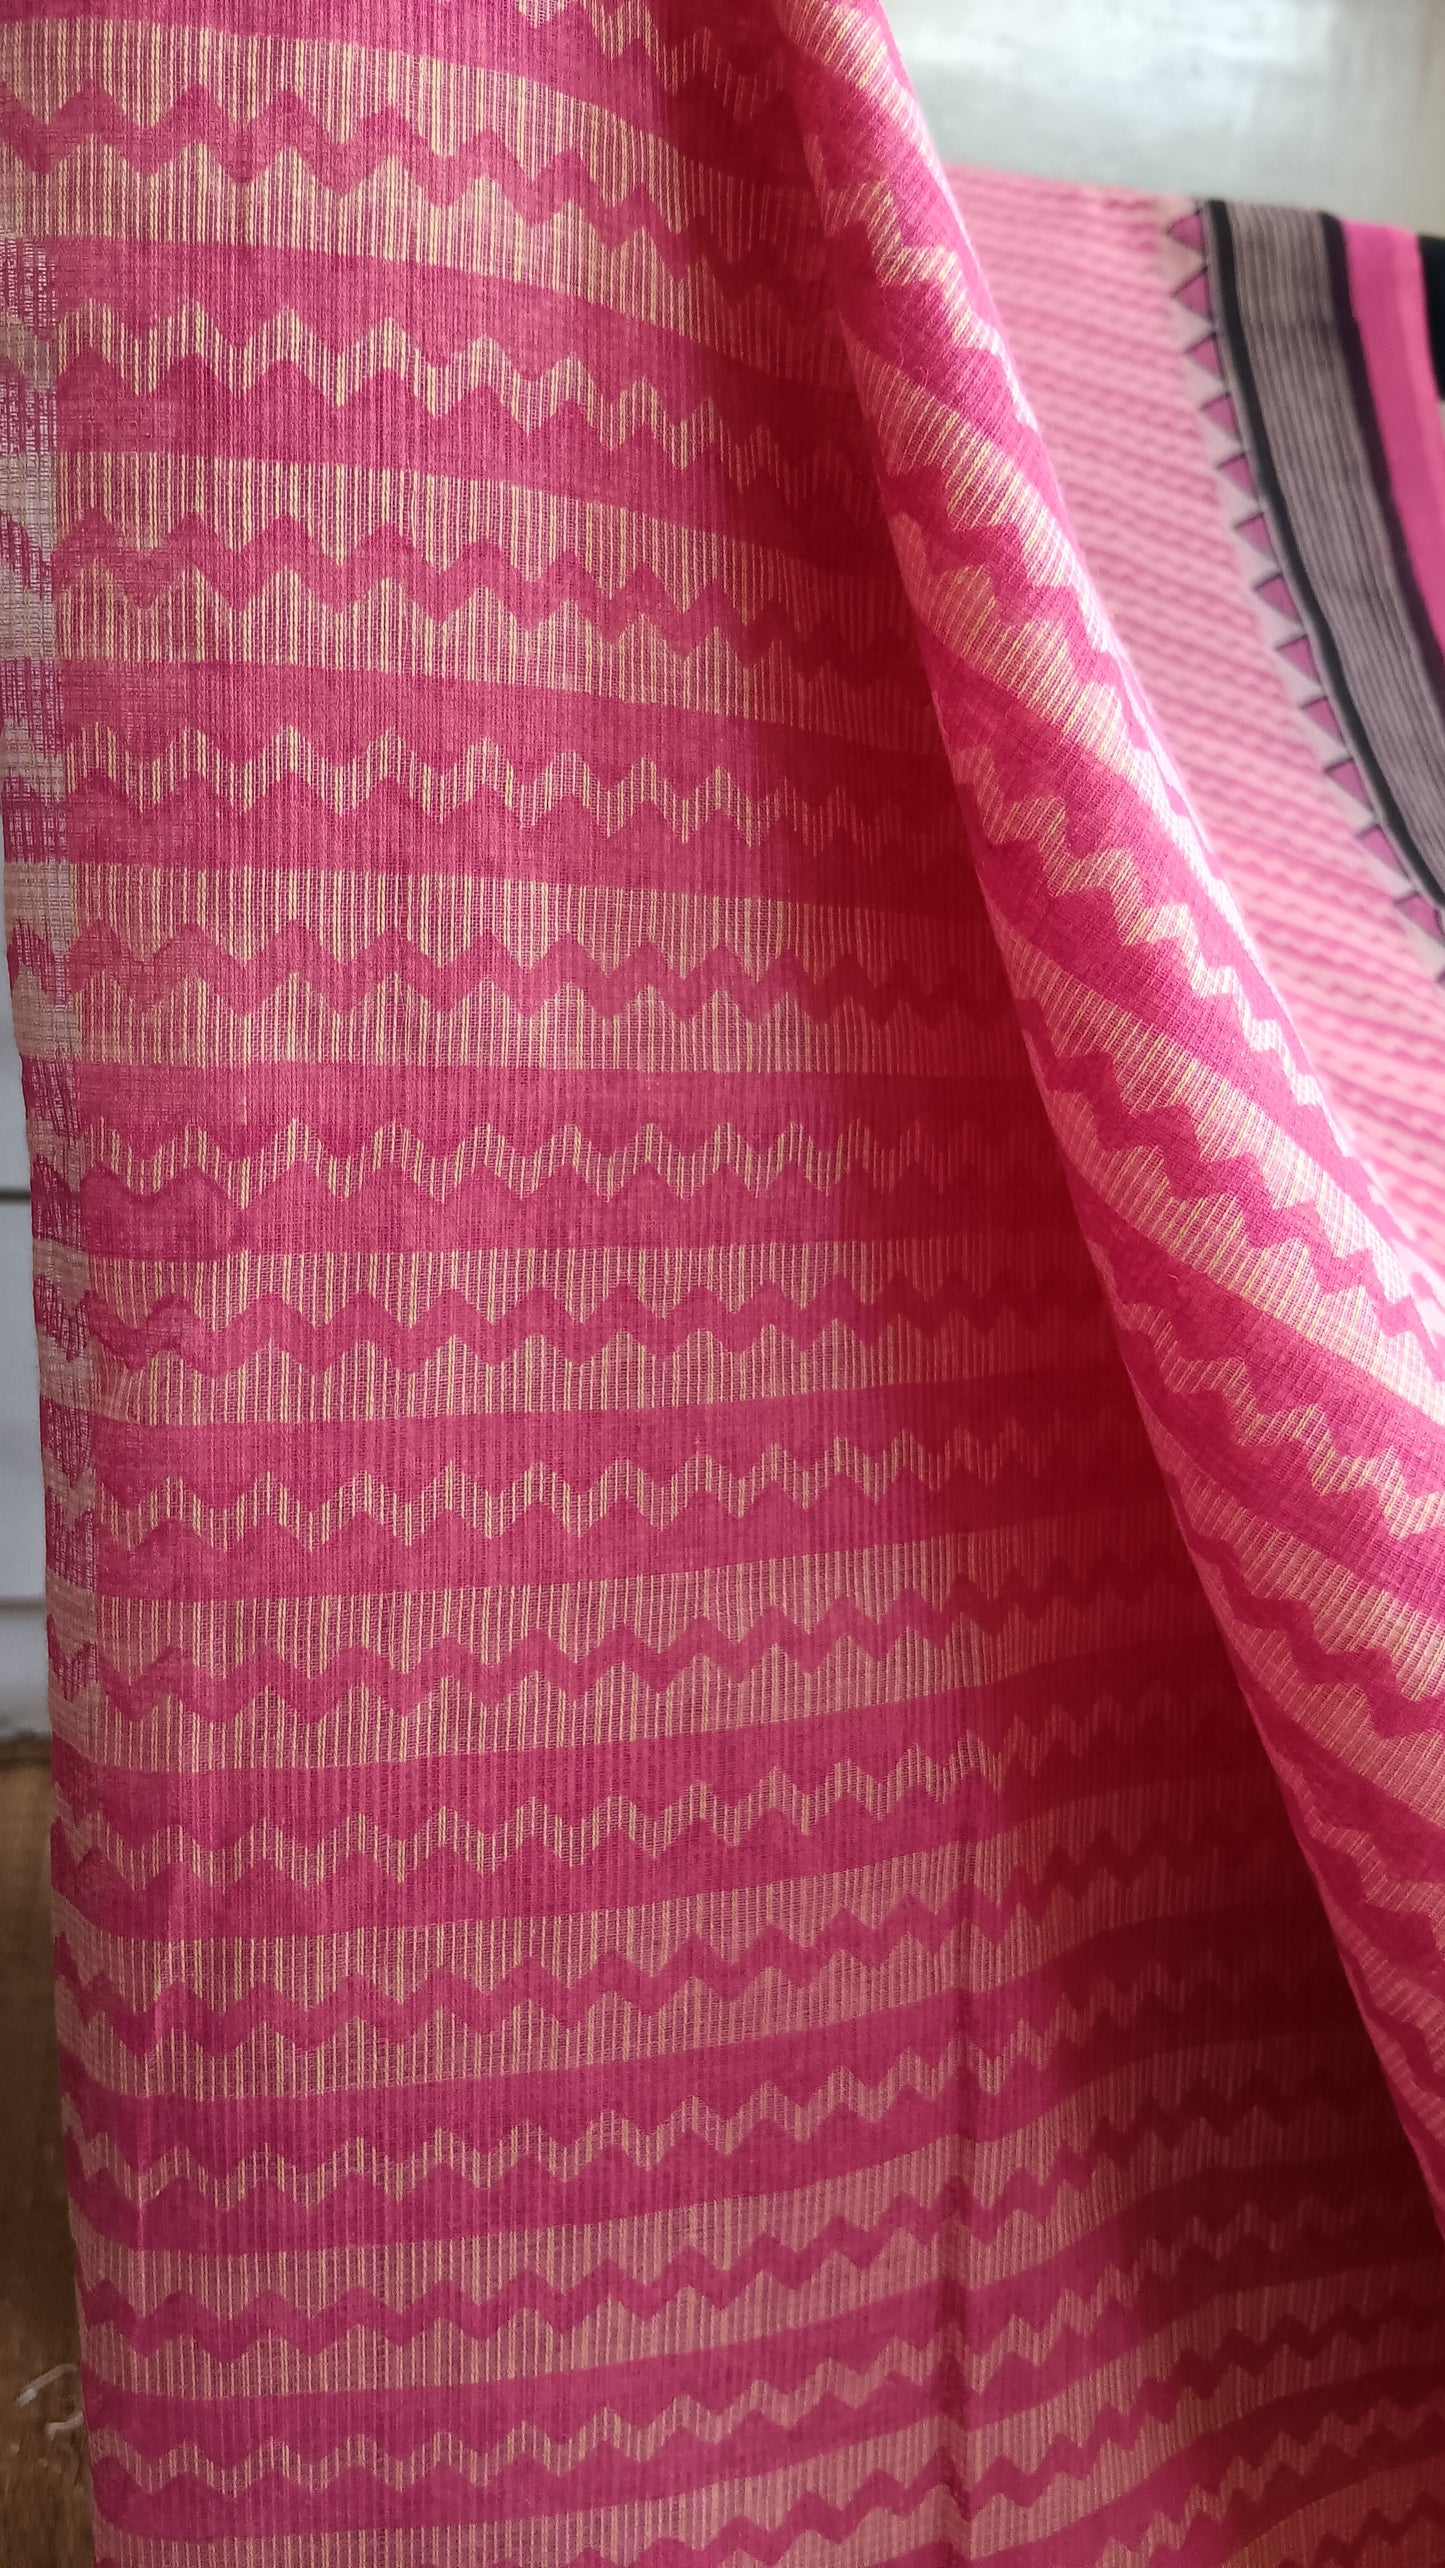 Close up view of the geometric pattern block printed on the body of a pink daily wear kota cotton saree